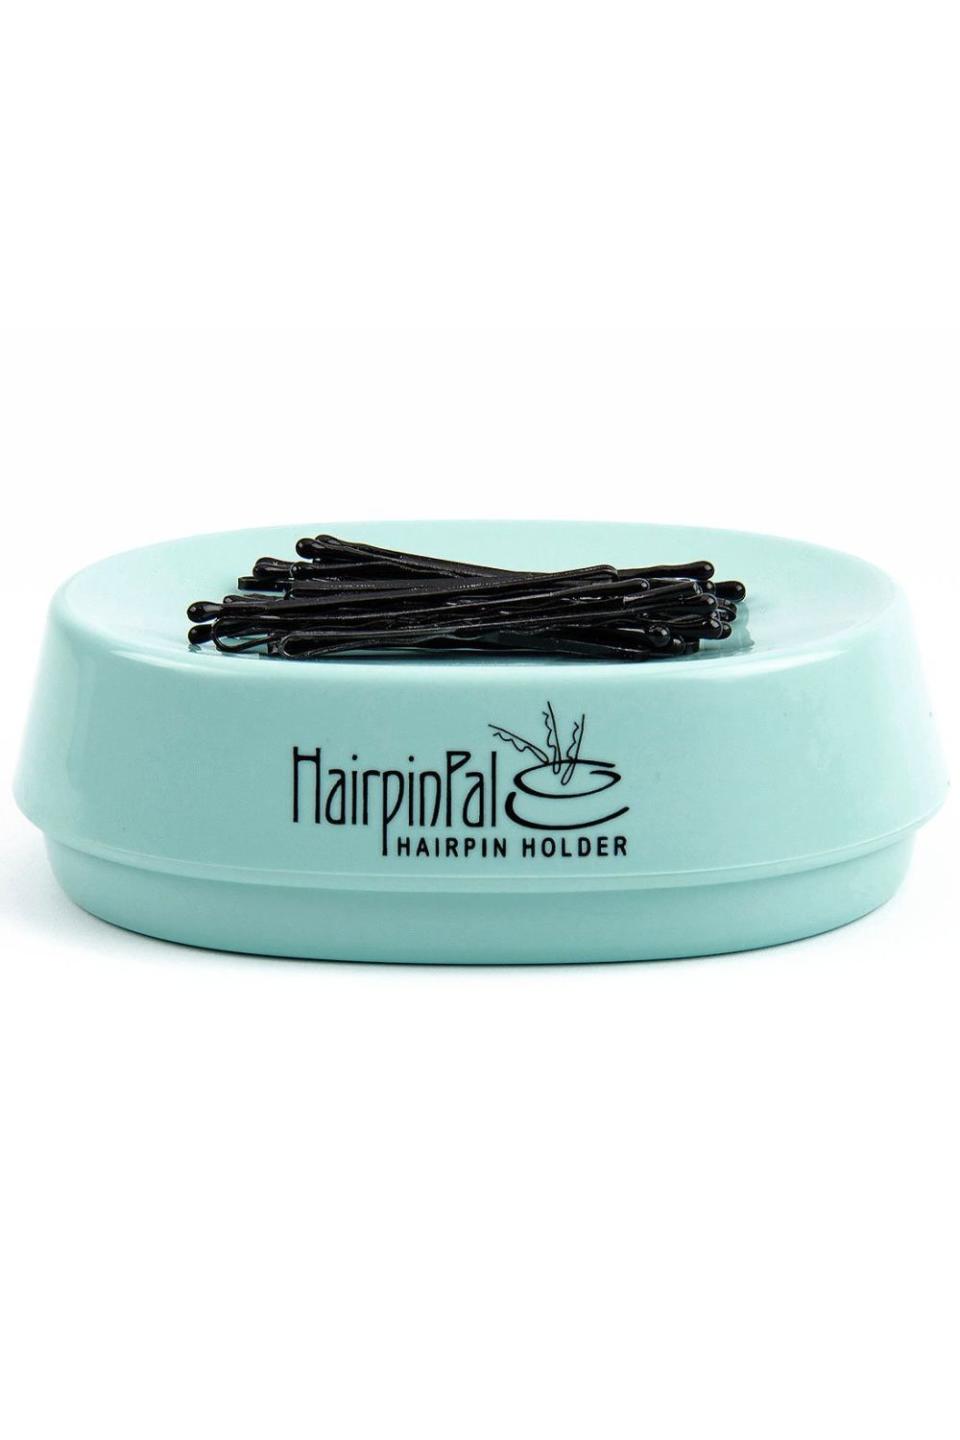 HairpinPal Bobby Pin and Hair Clip Magnetic Holder